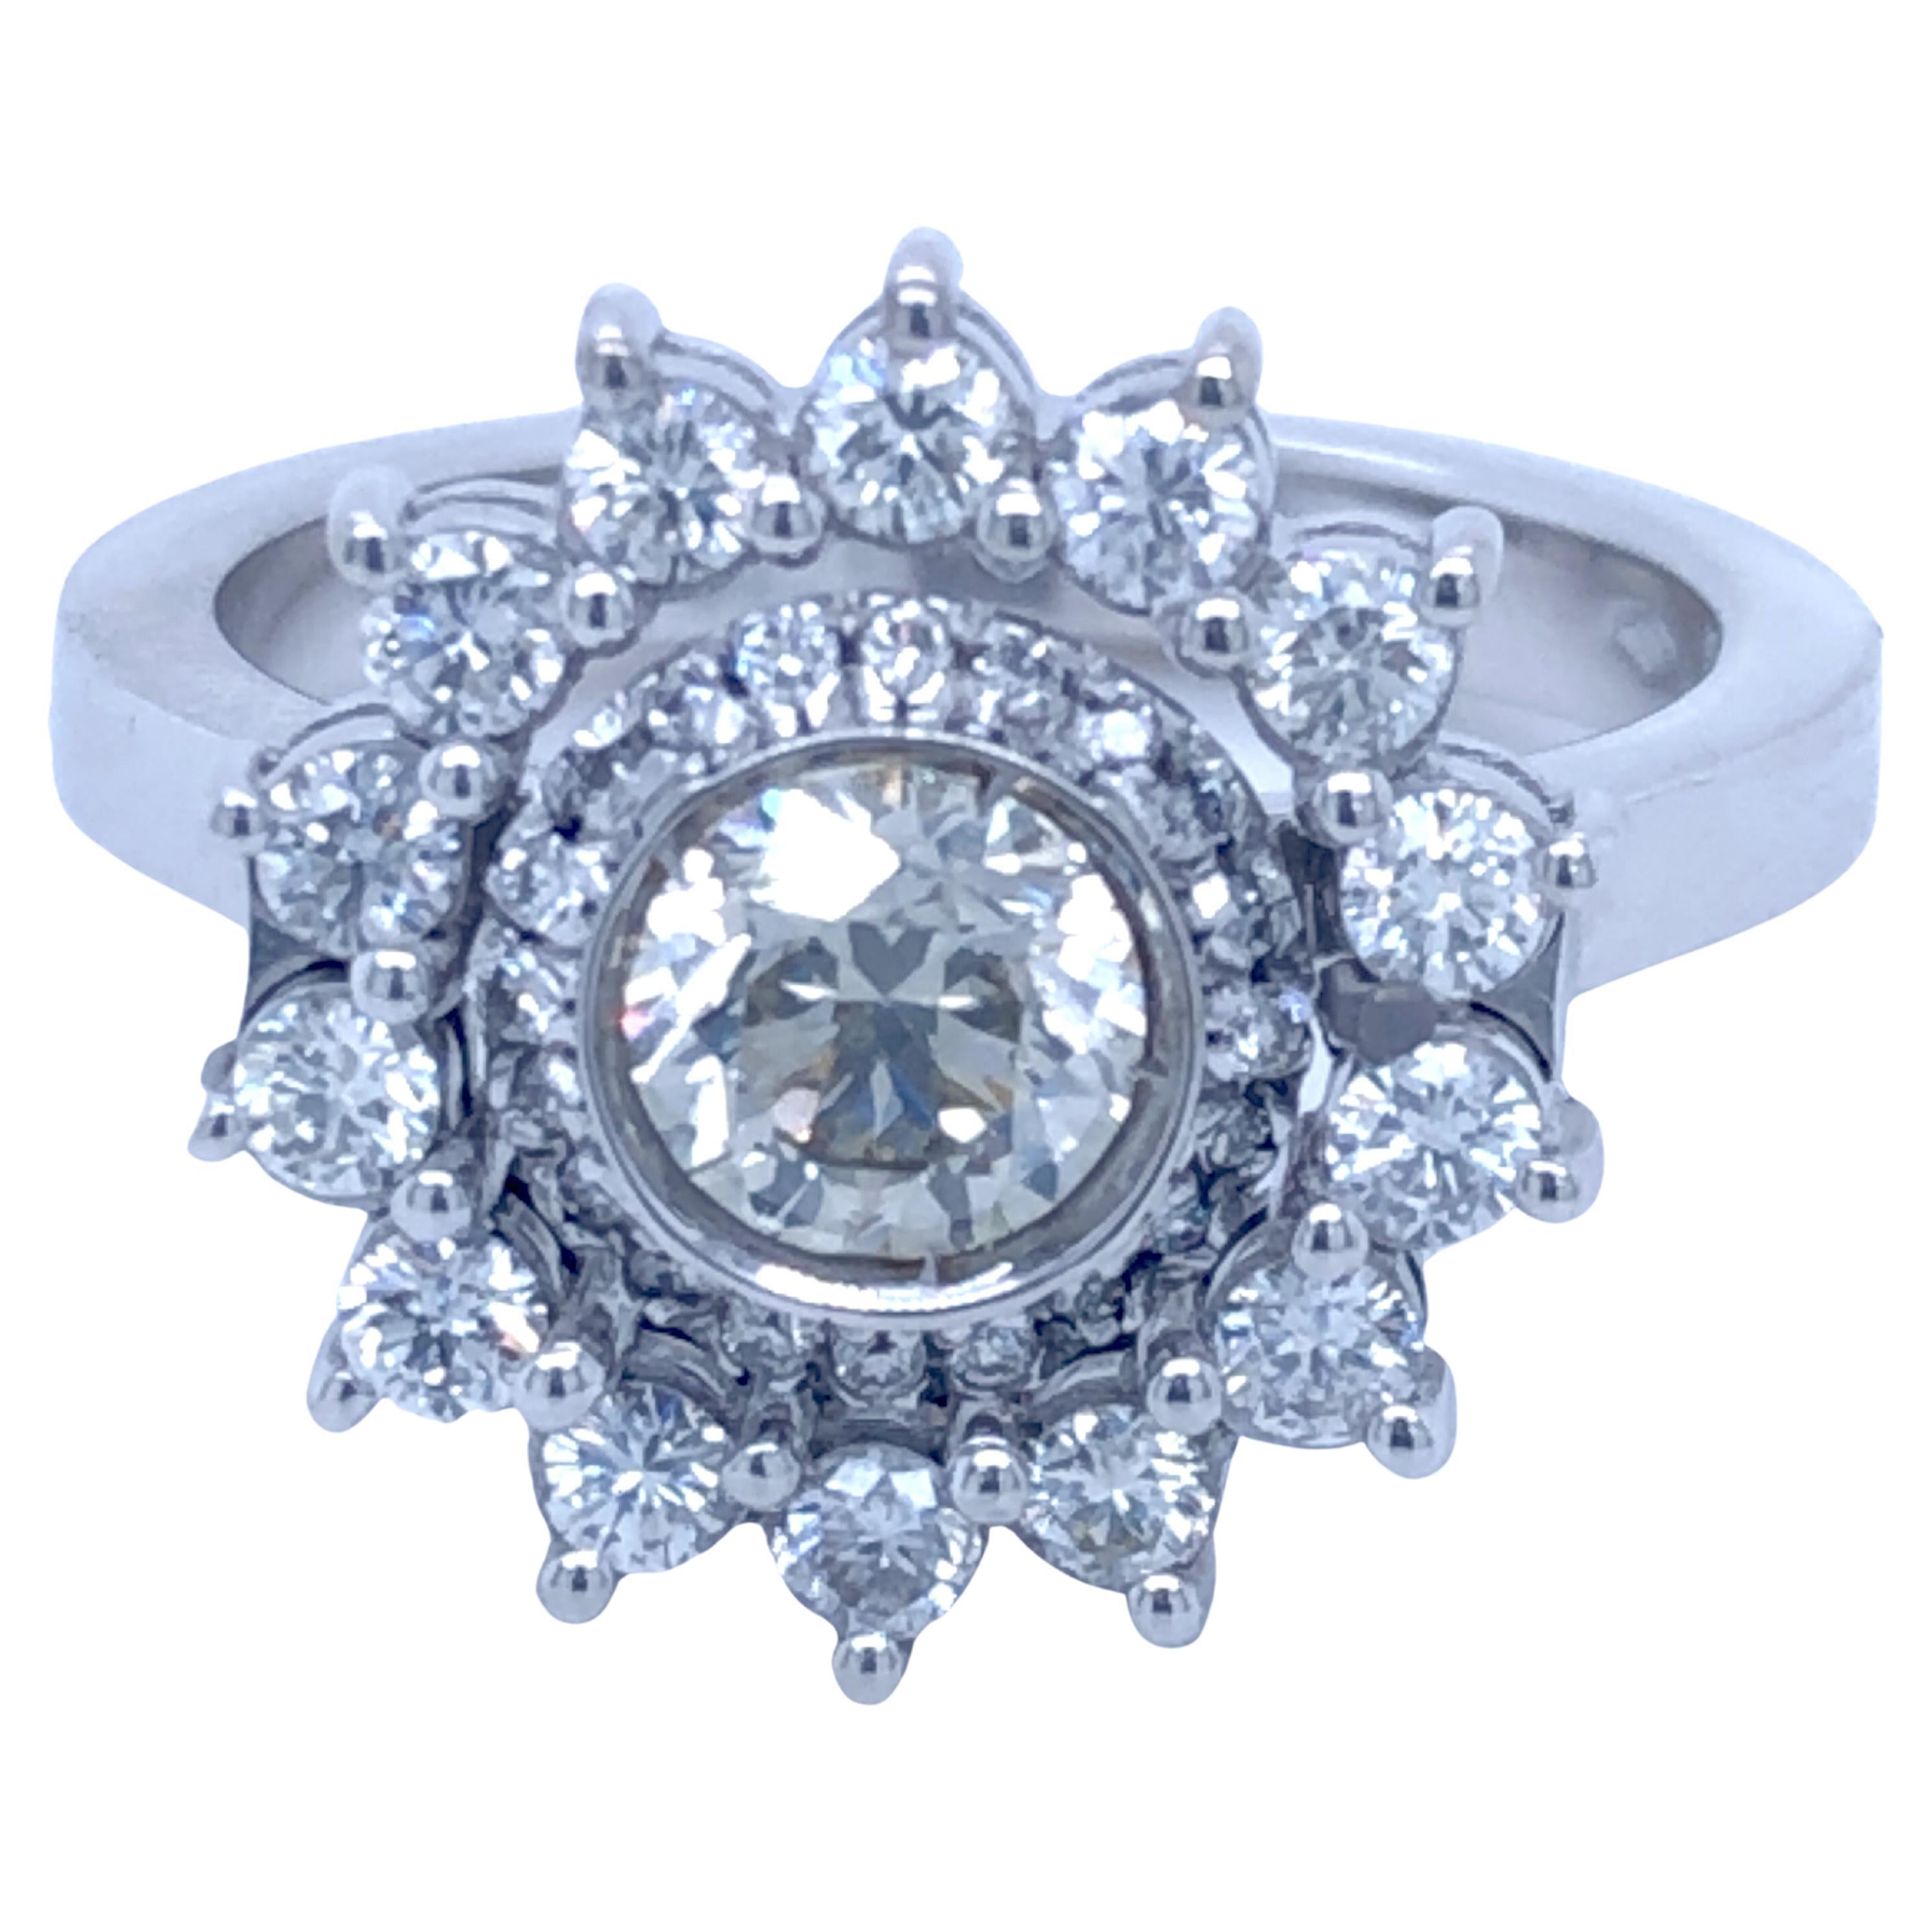 0.61 Carat AIG Certified White Diamond(H, VVS2) in a Chic yet Timeless, Sumptuous 0.78Kt White Diamond 18Kt White Gold Double Halo Setting.
AIG Report D2130171520 October 24 2021,  is included.
In our fitted burgundy leather case, beautifully gift